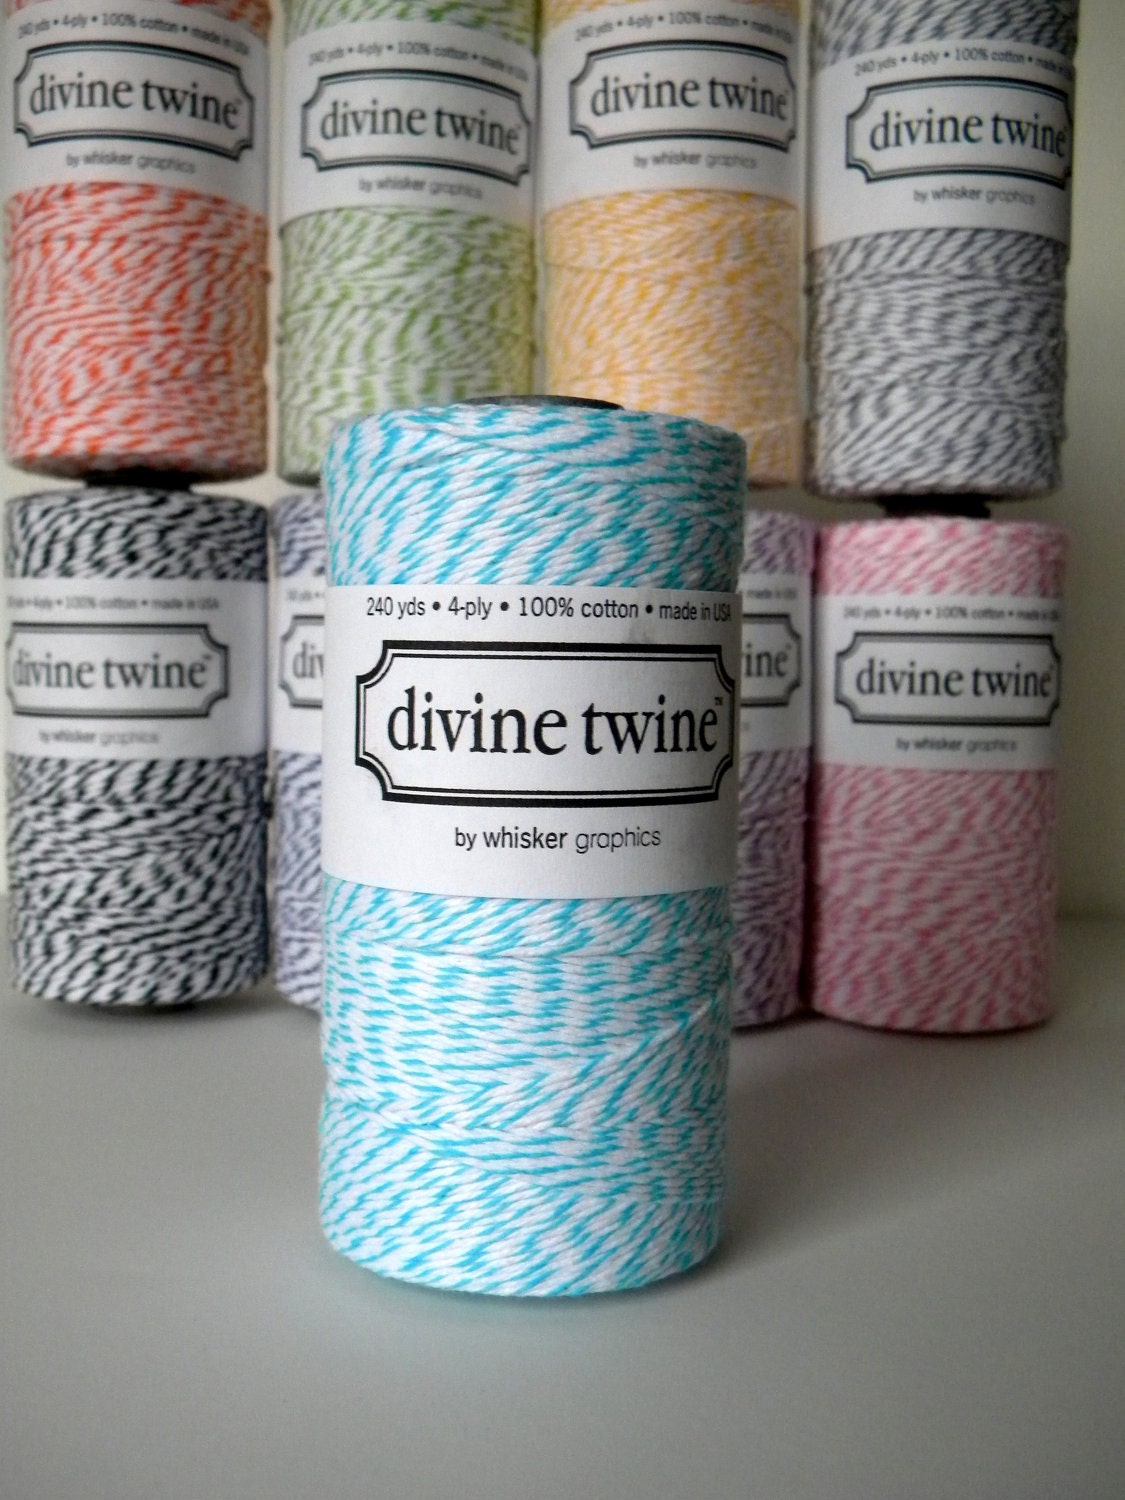 TEAL Bakers Twine TEAL Divine Twine Teal and White Bakers Twine 240 Yards  Teal Twine Teal Yarn Teal Knitting Teal Cotton String 